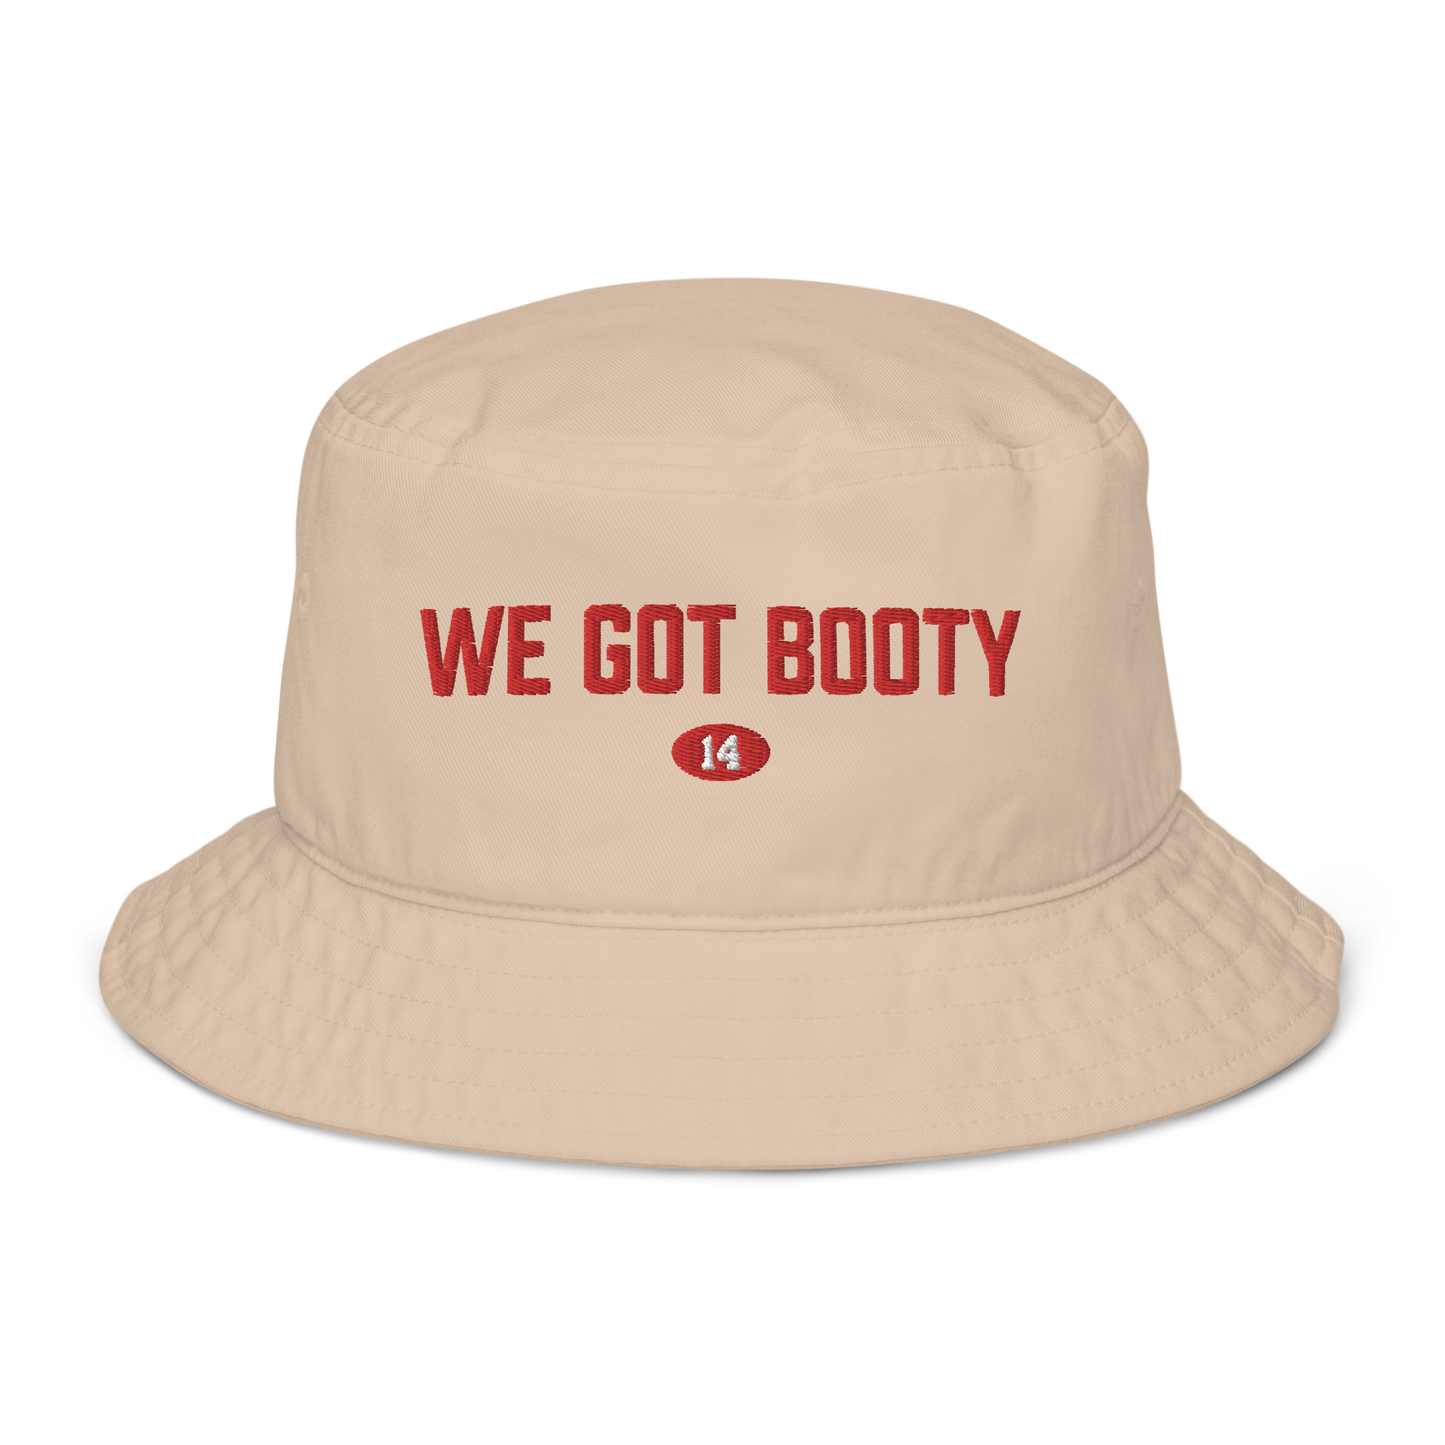 WE GOT BOOTY BUCKET - The General Booty Official Shop by More Than Just A Name | MTJN